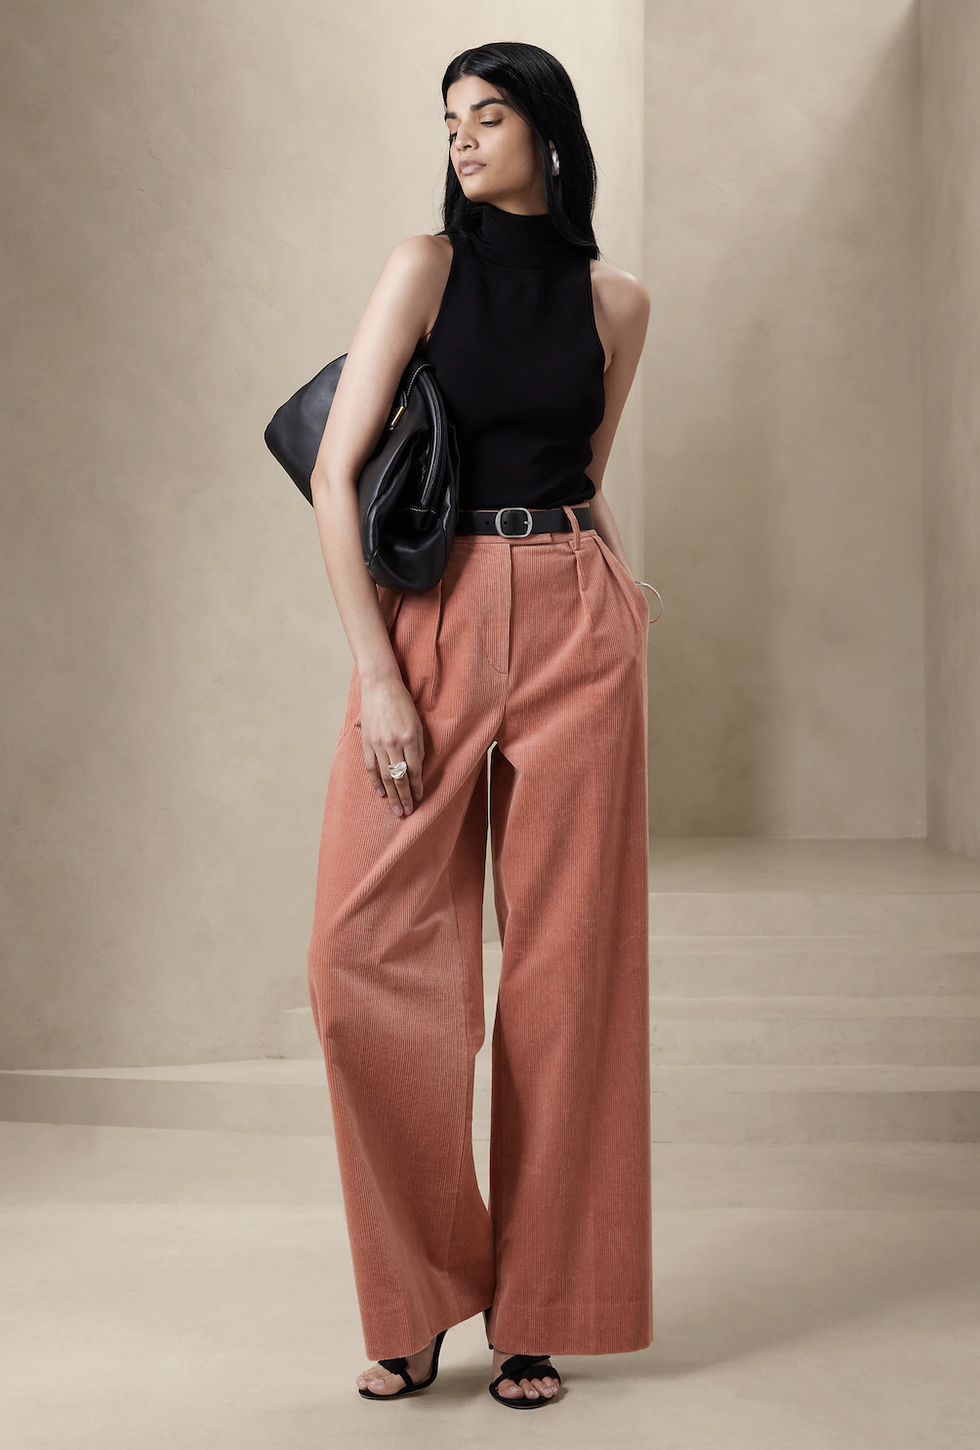 Classic Spring Corduroy Flare Pants For Women Vintage High Waist